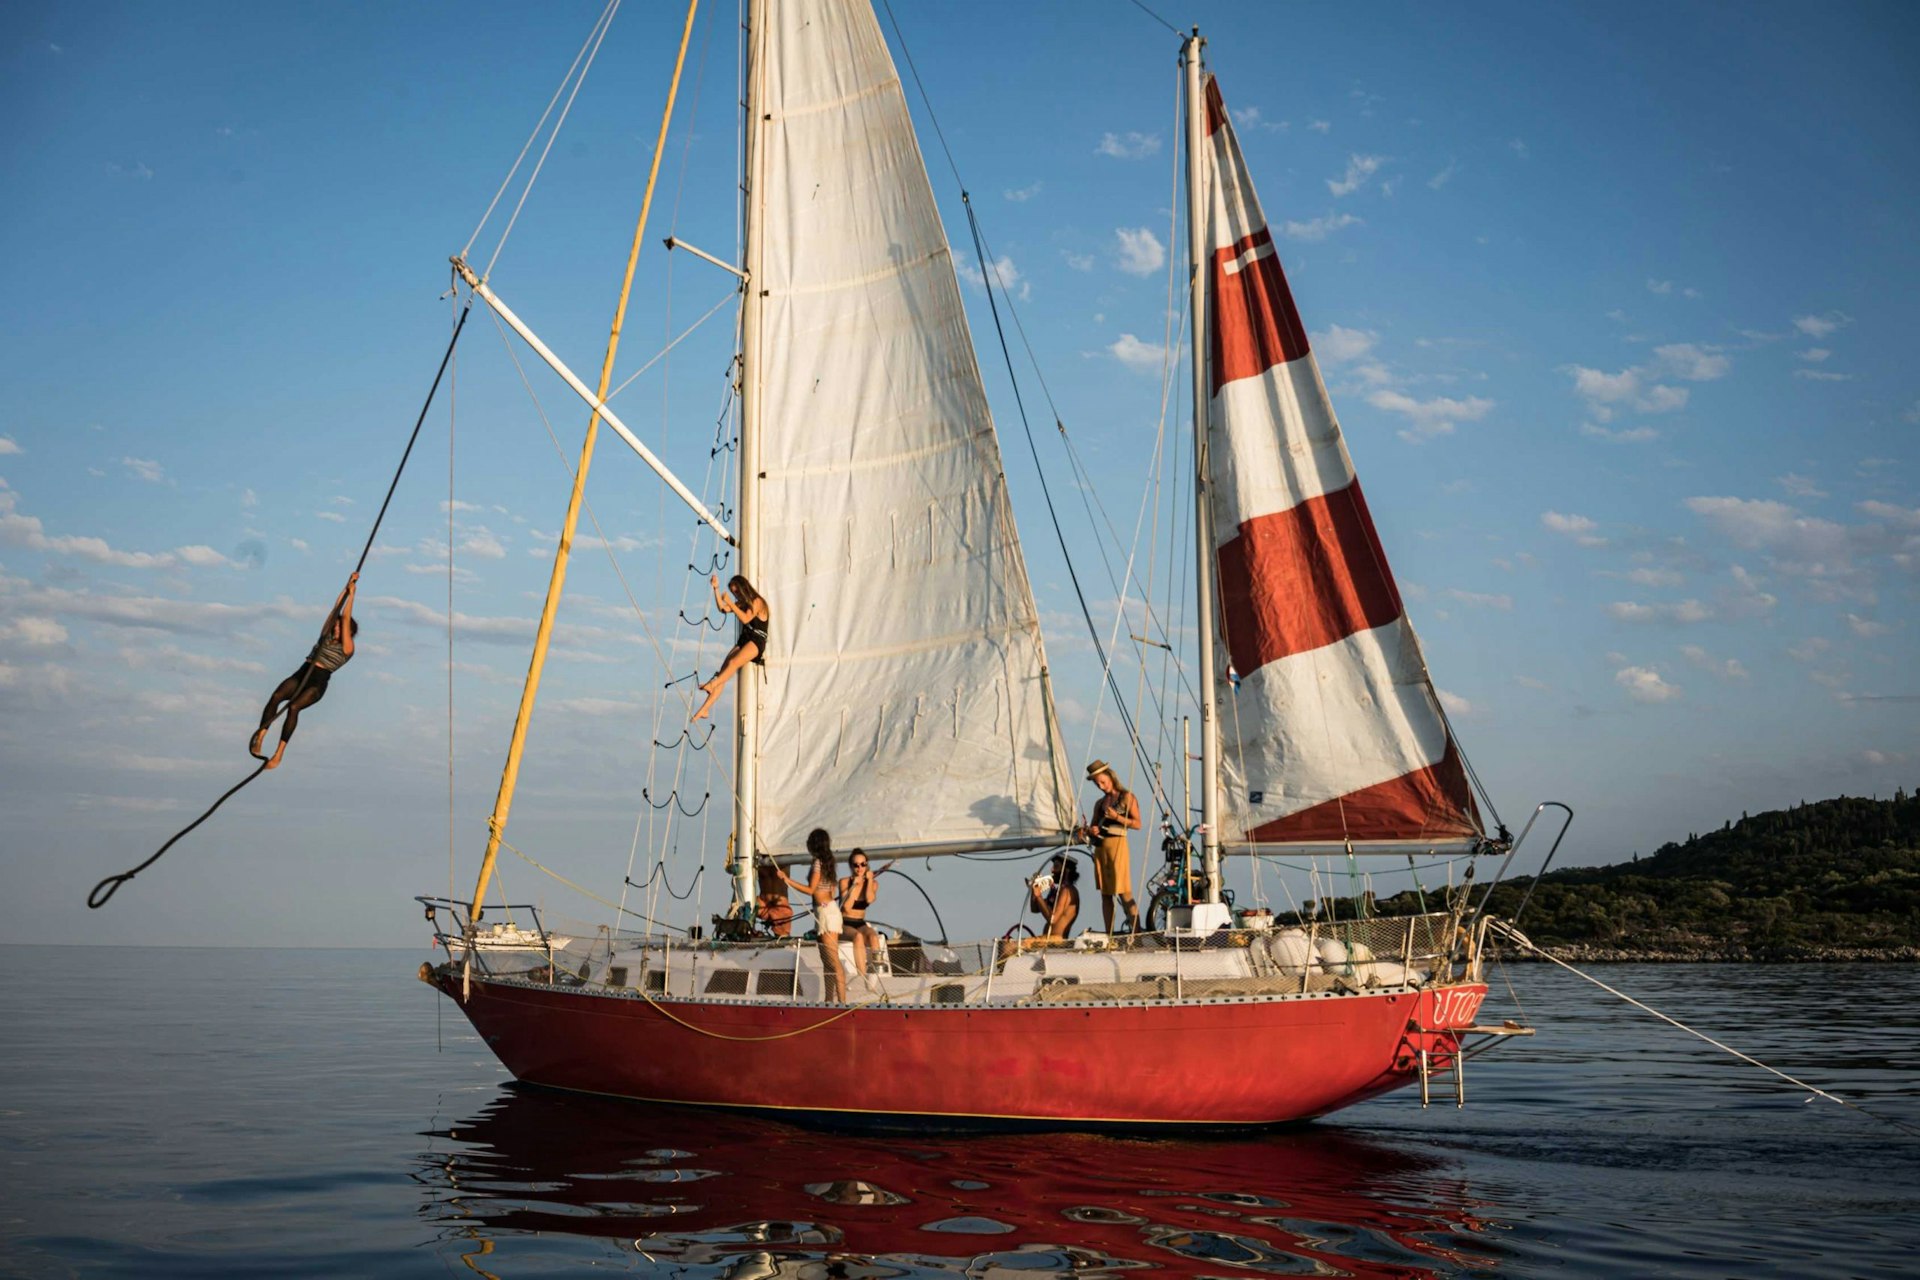 The island-hopping circus crew reimagining a life at sea